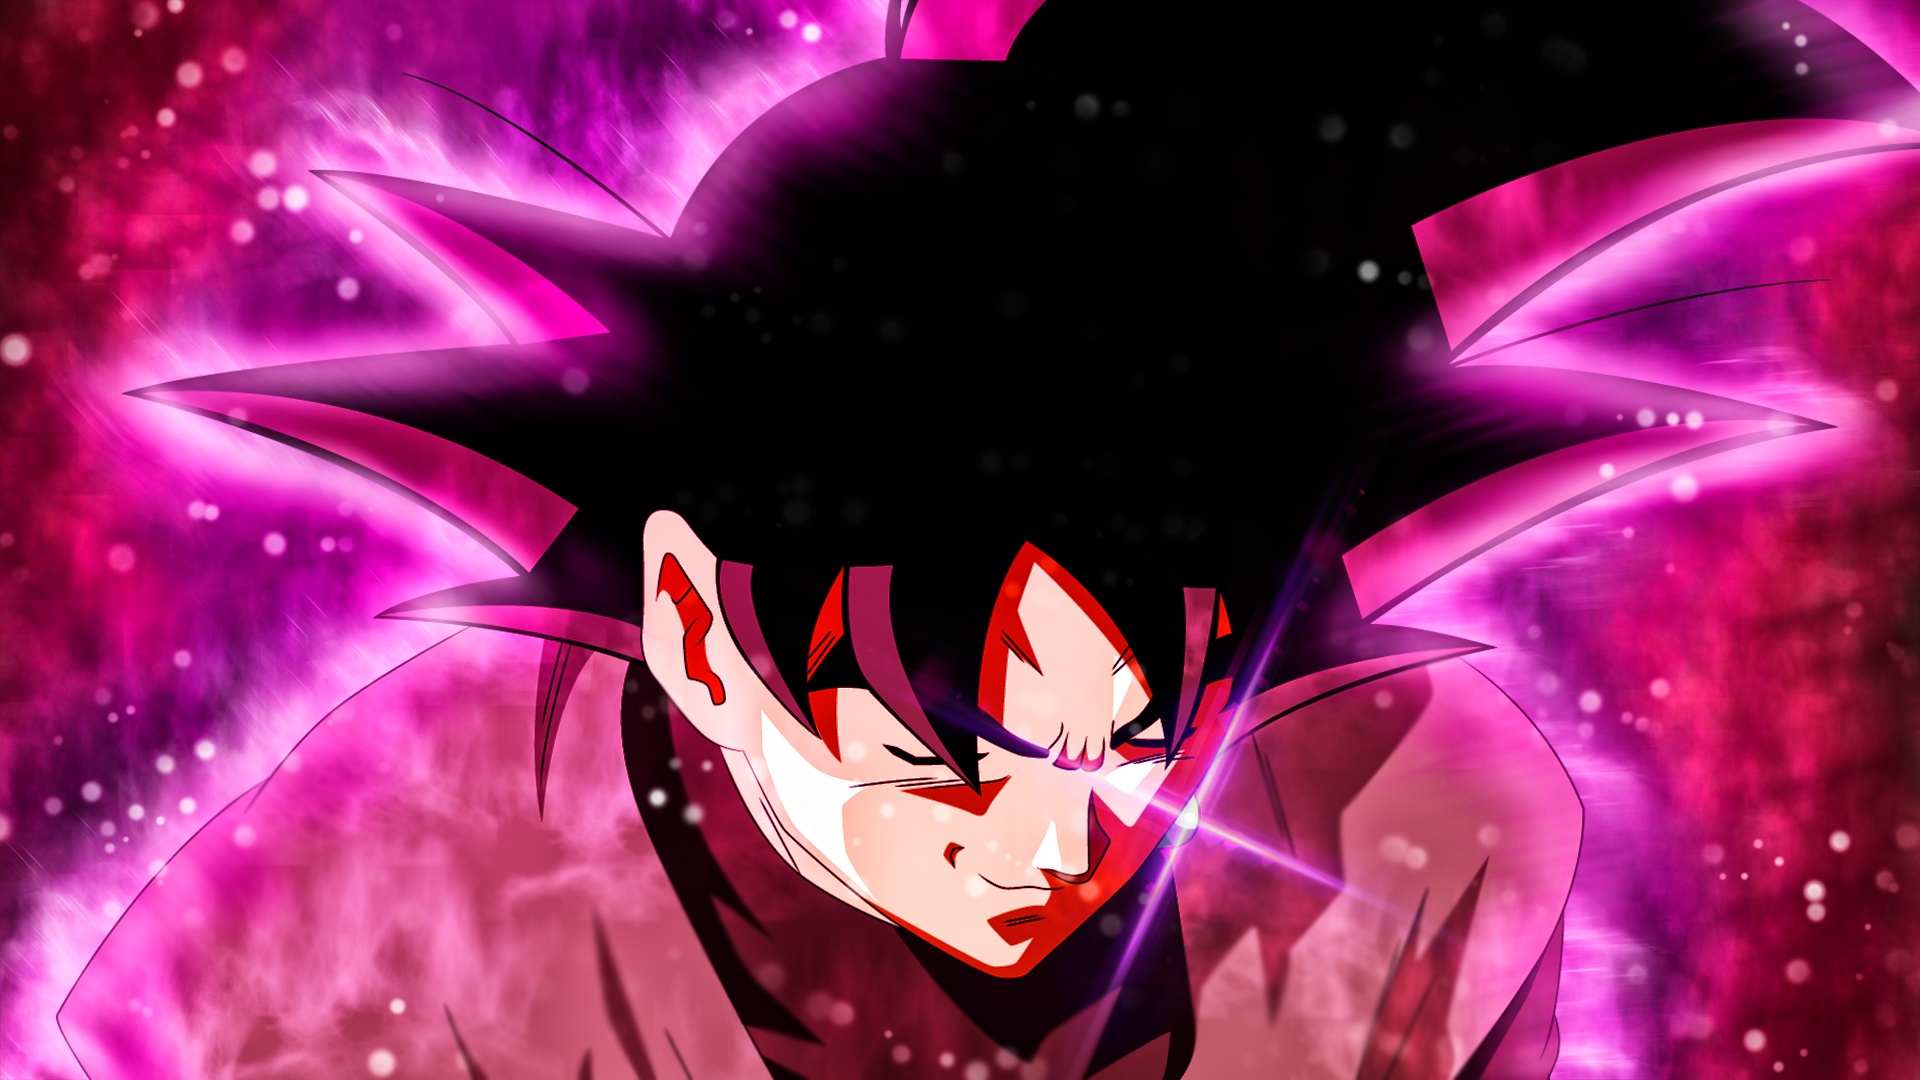 110+ Black Goku HD Wallpapers and Backgrounds